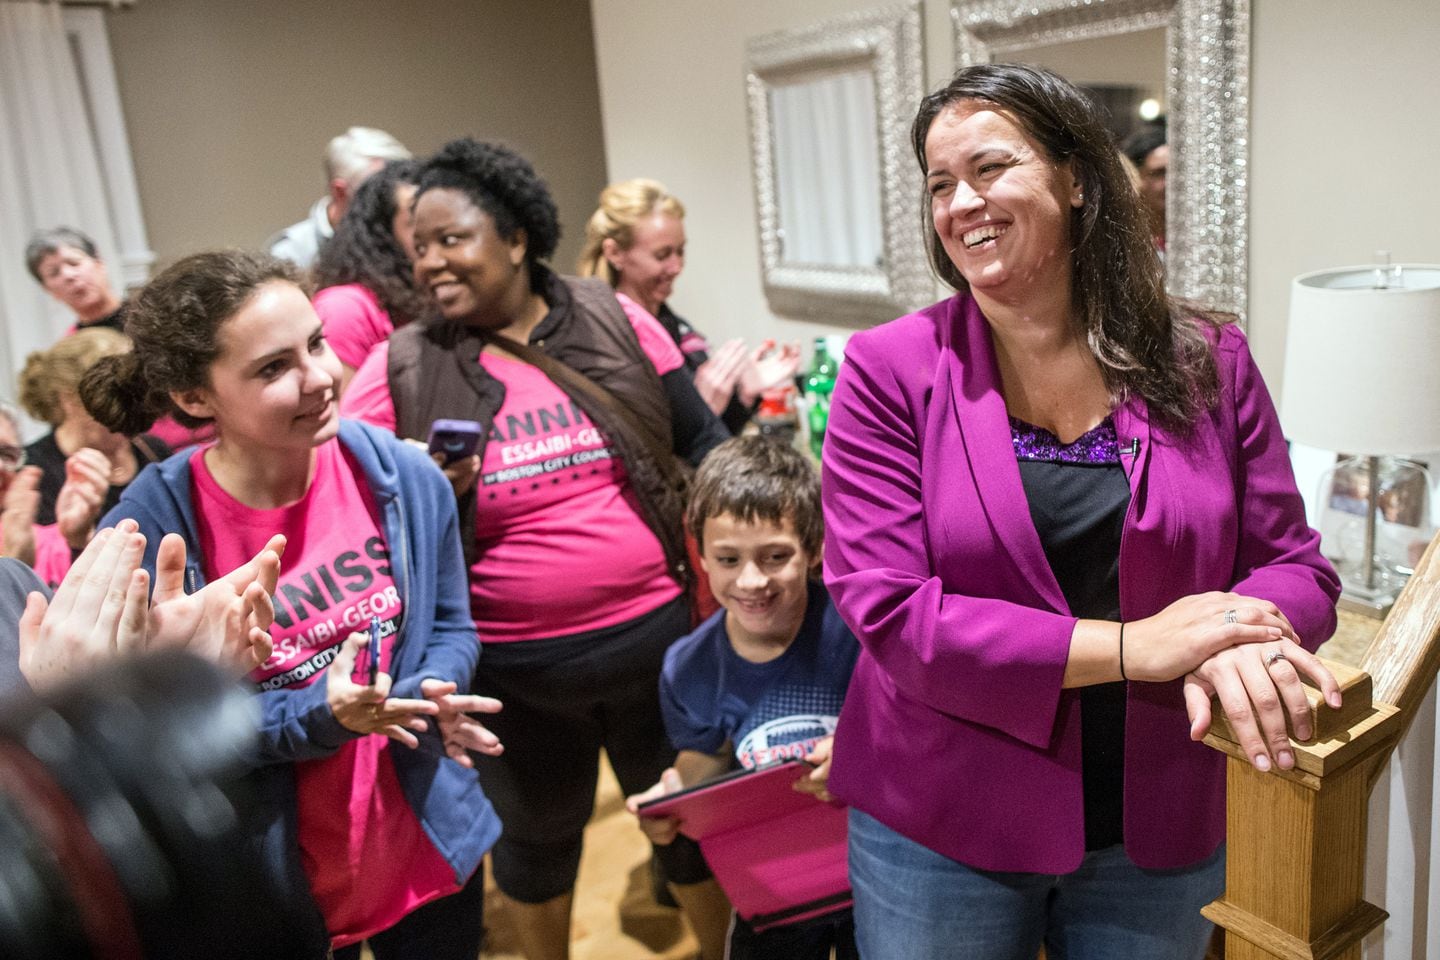  Essaibi George celebrated her election to the City Council in 2015 with a party at her home in Dorchester. 